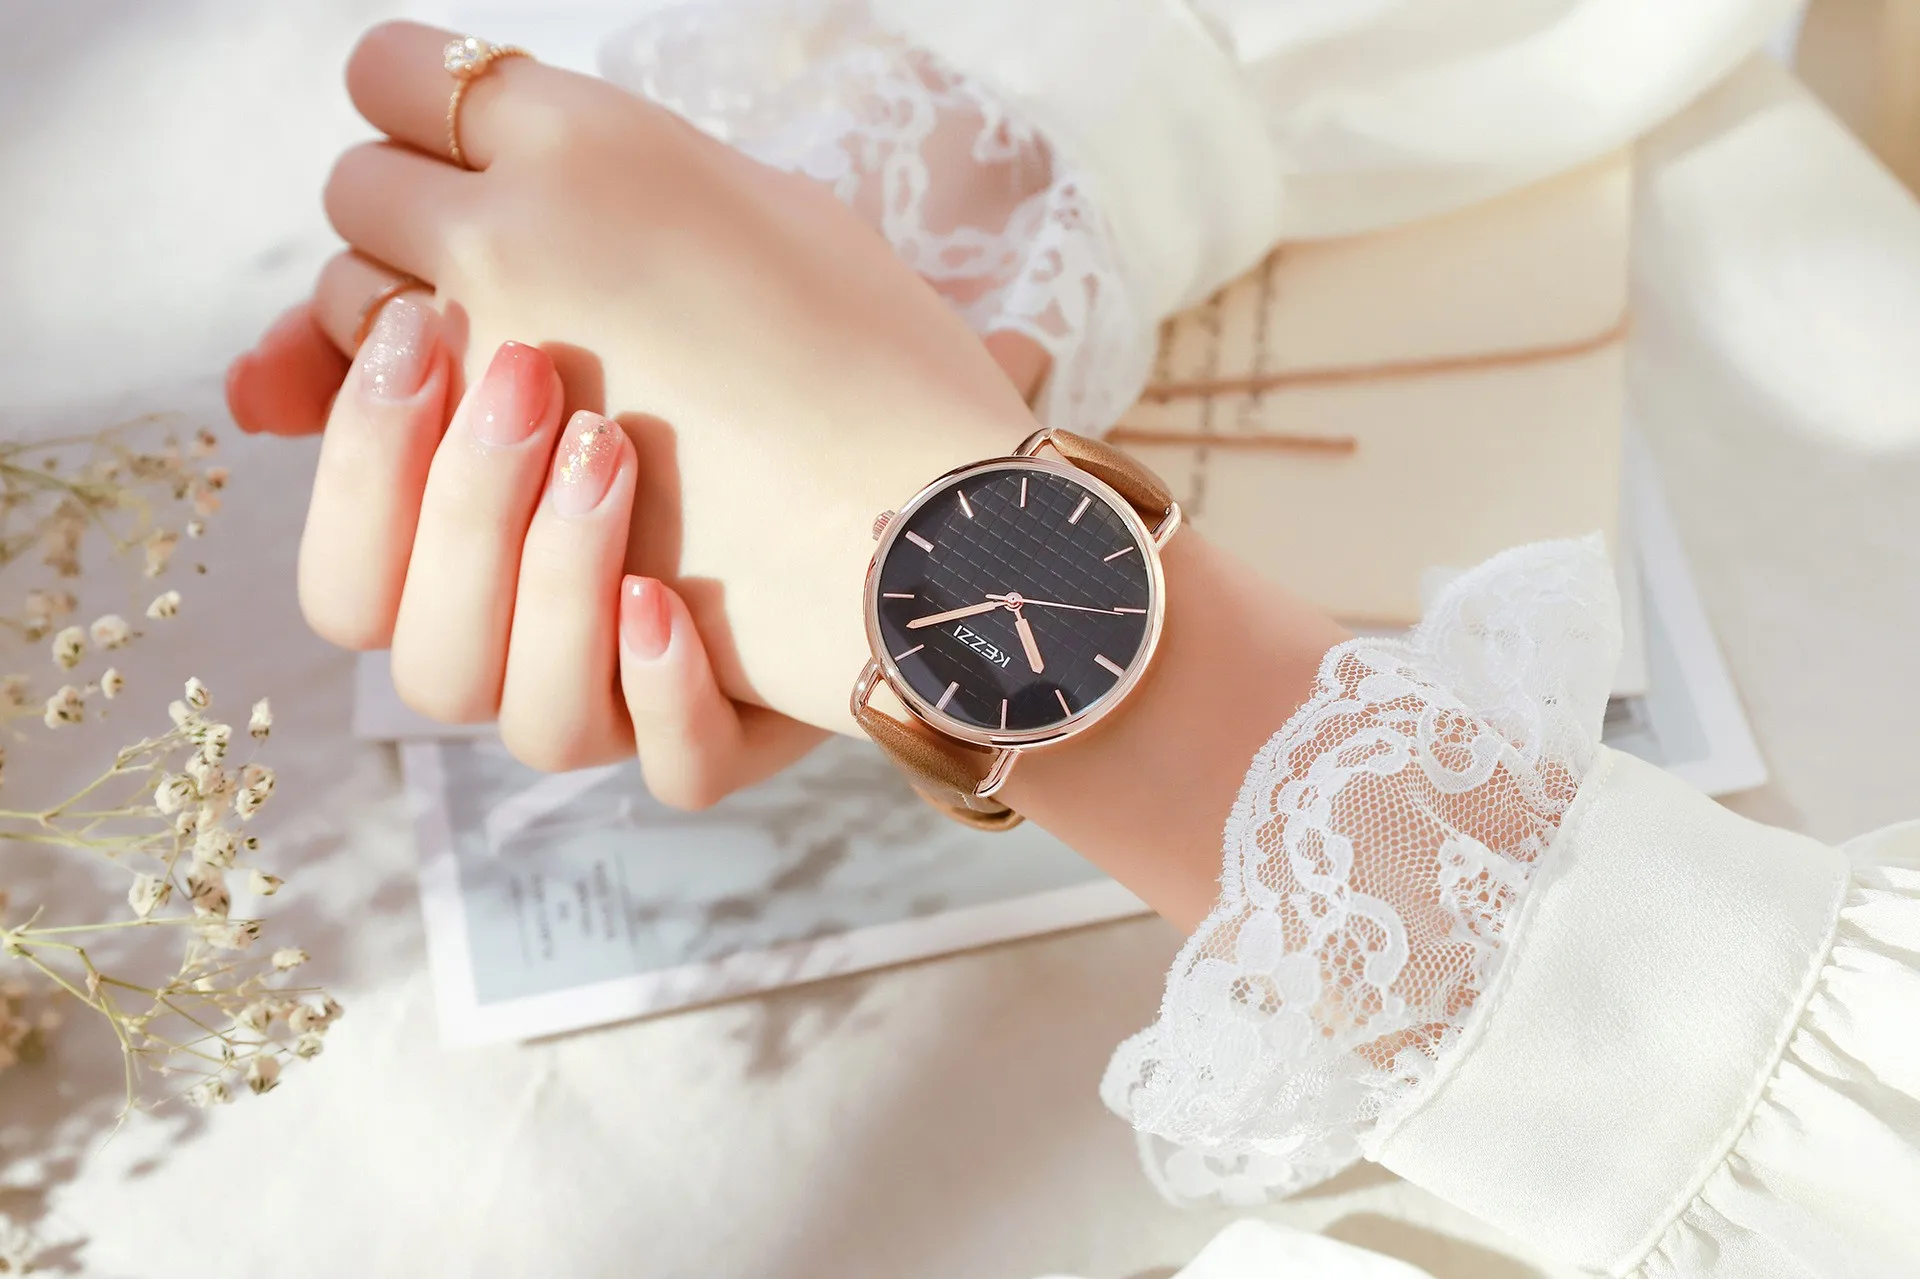 The same fashionable, cool and trendy women's watch made by Netcom is a simple quartz watch for senior high school students